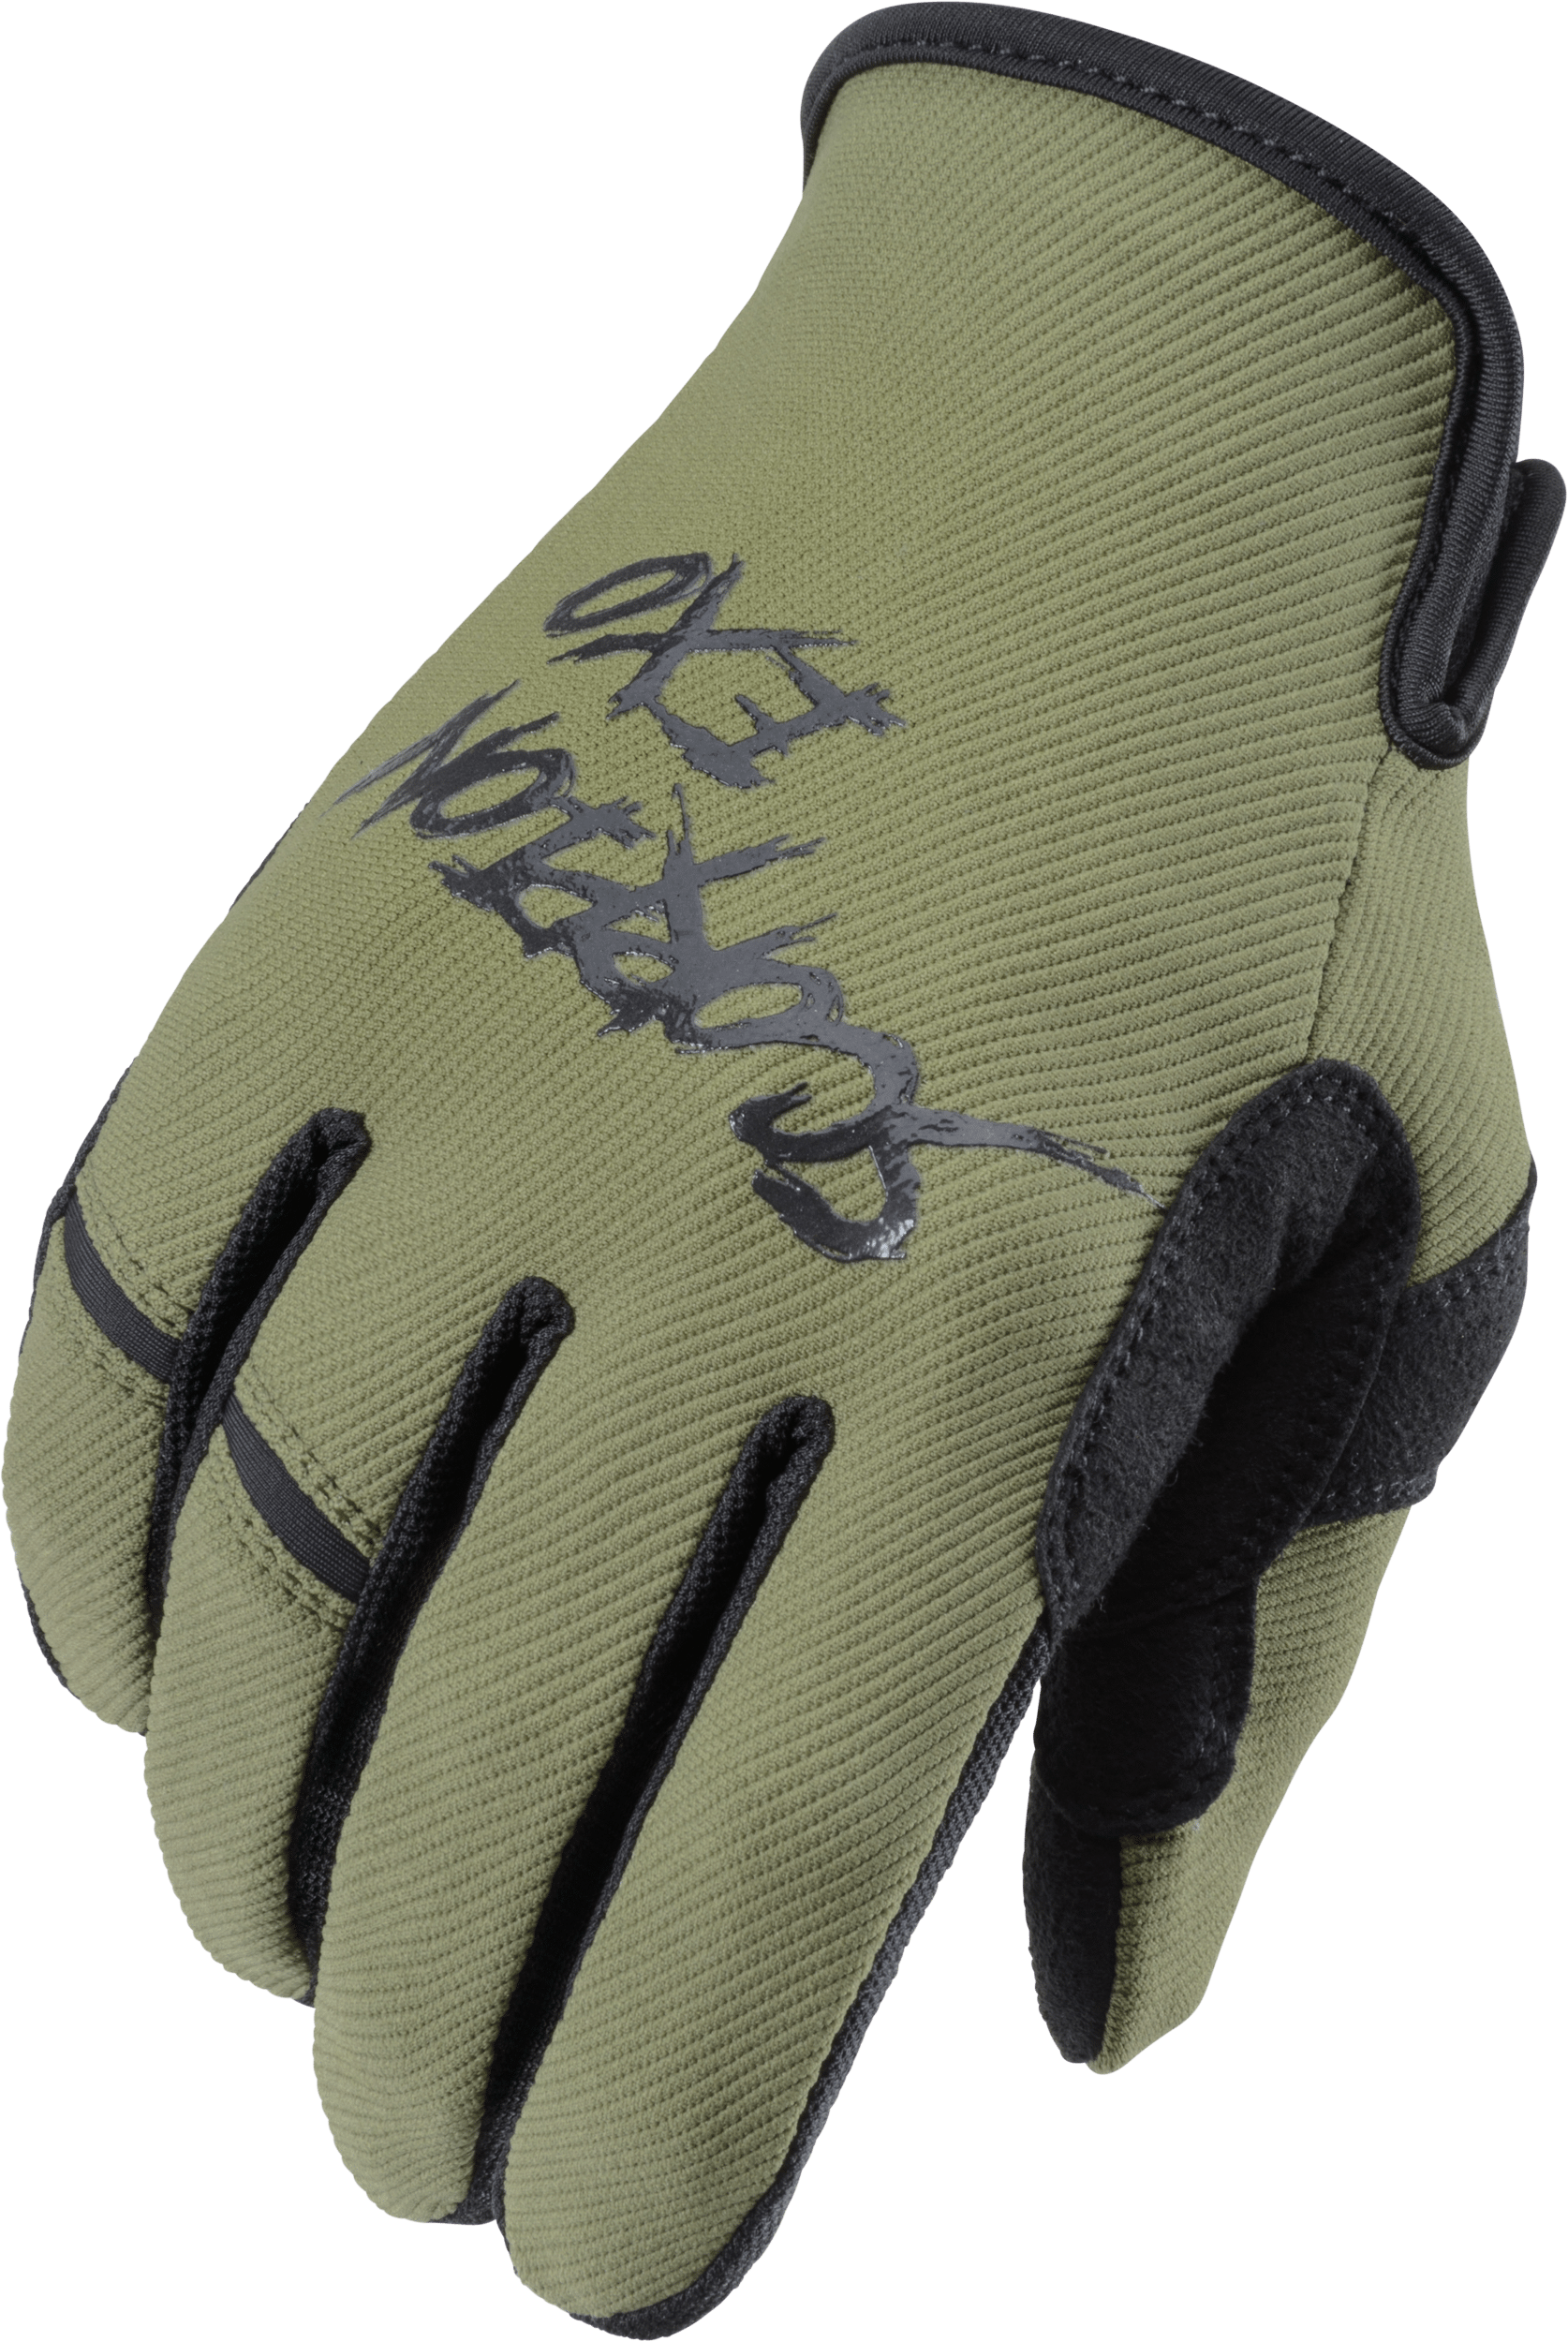 Western Powersports Gloves Olive/Coal / 2X-Large Air-Stretch Grind Gloves by Scorpion Exo G46-097